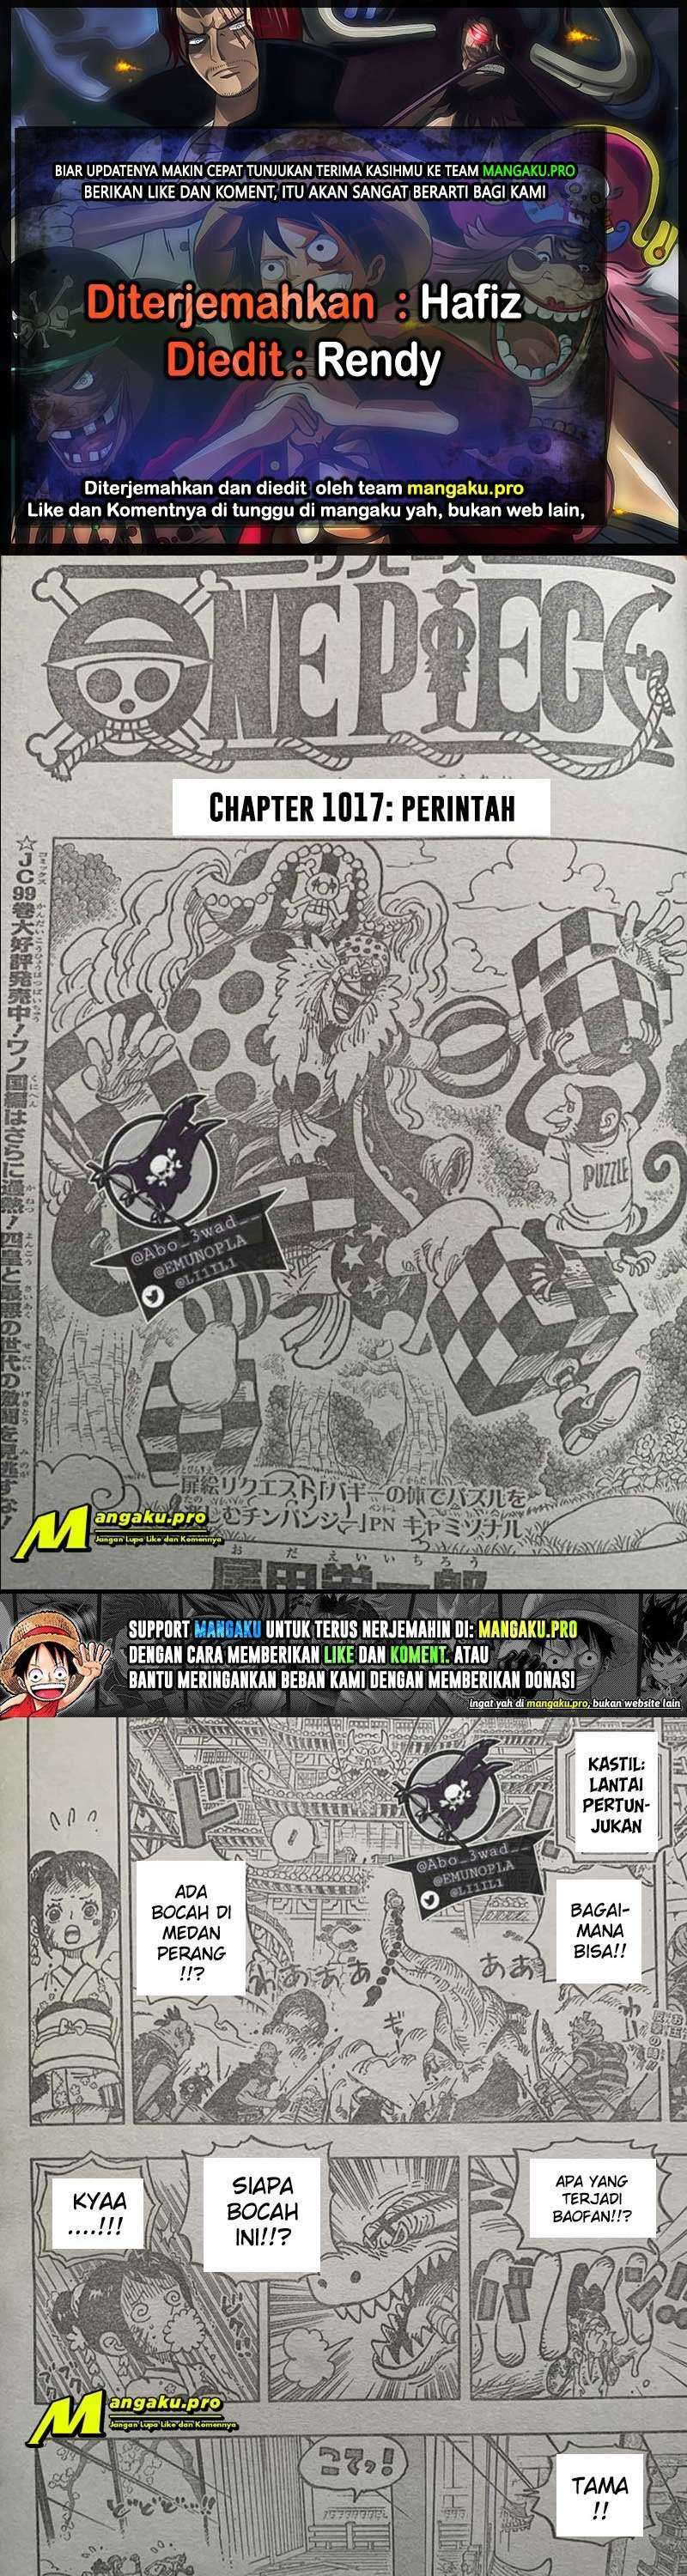 One Piece Chapter 1017 Lq - 49